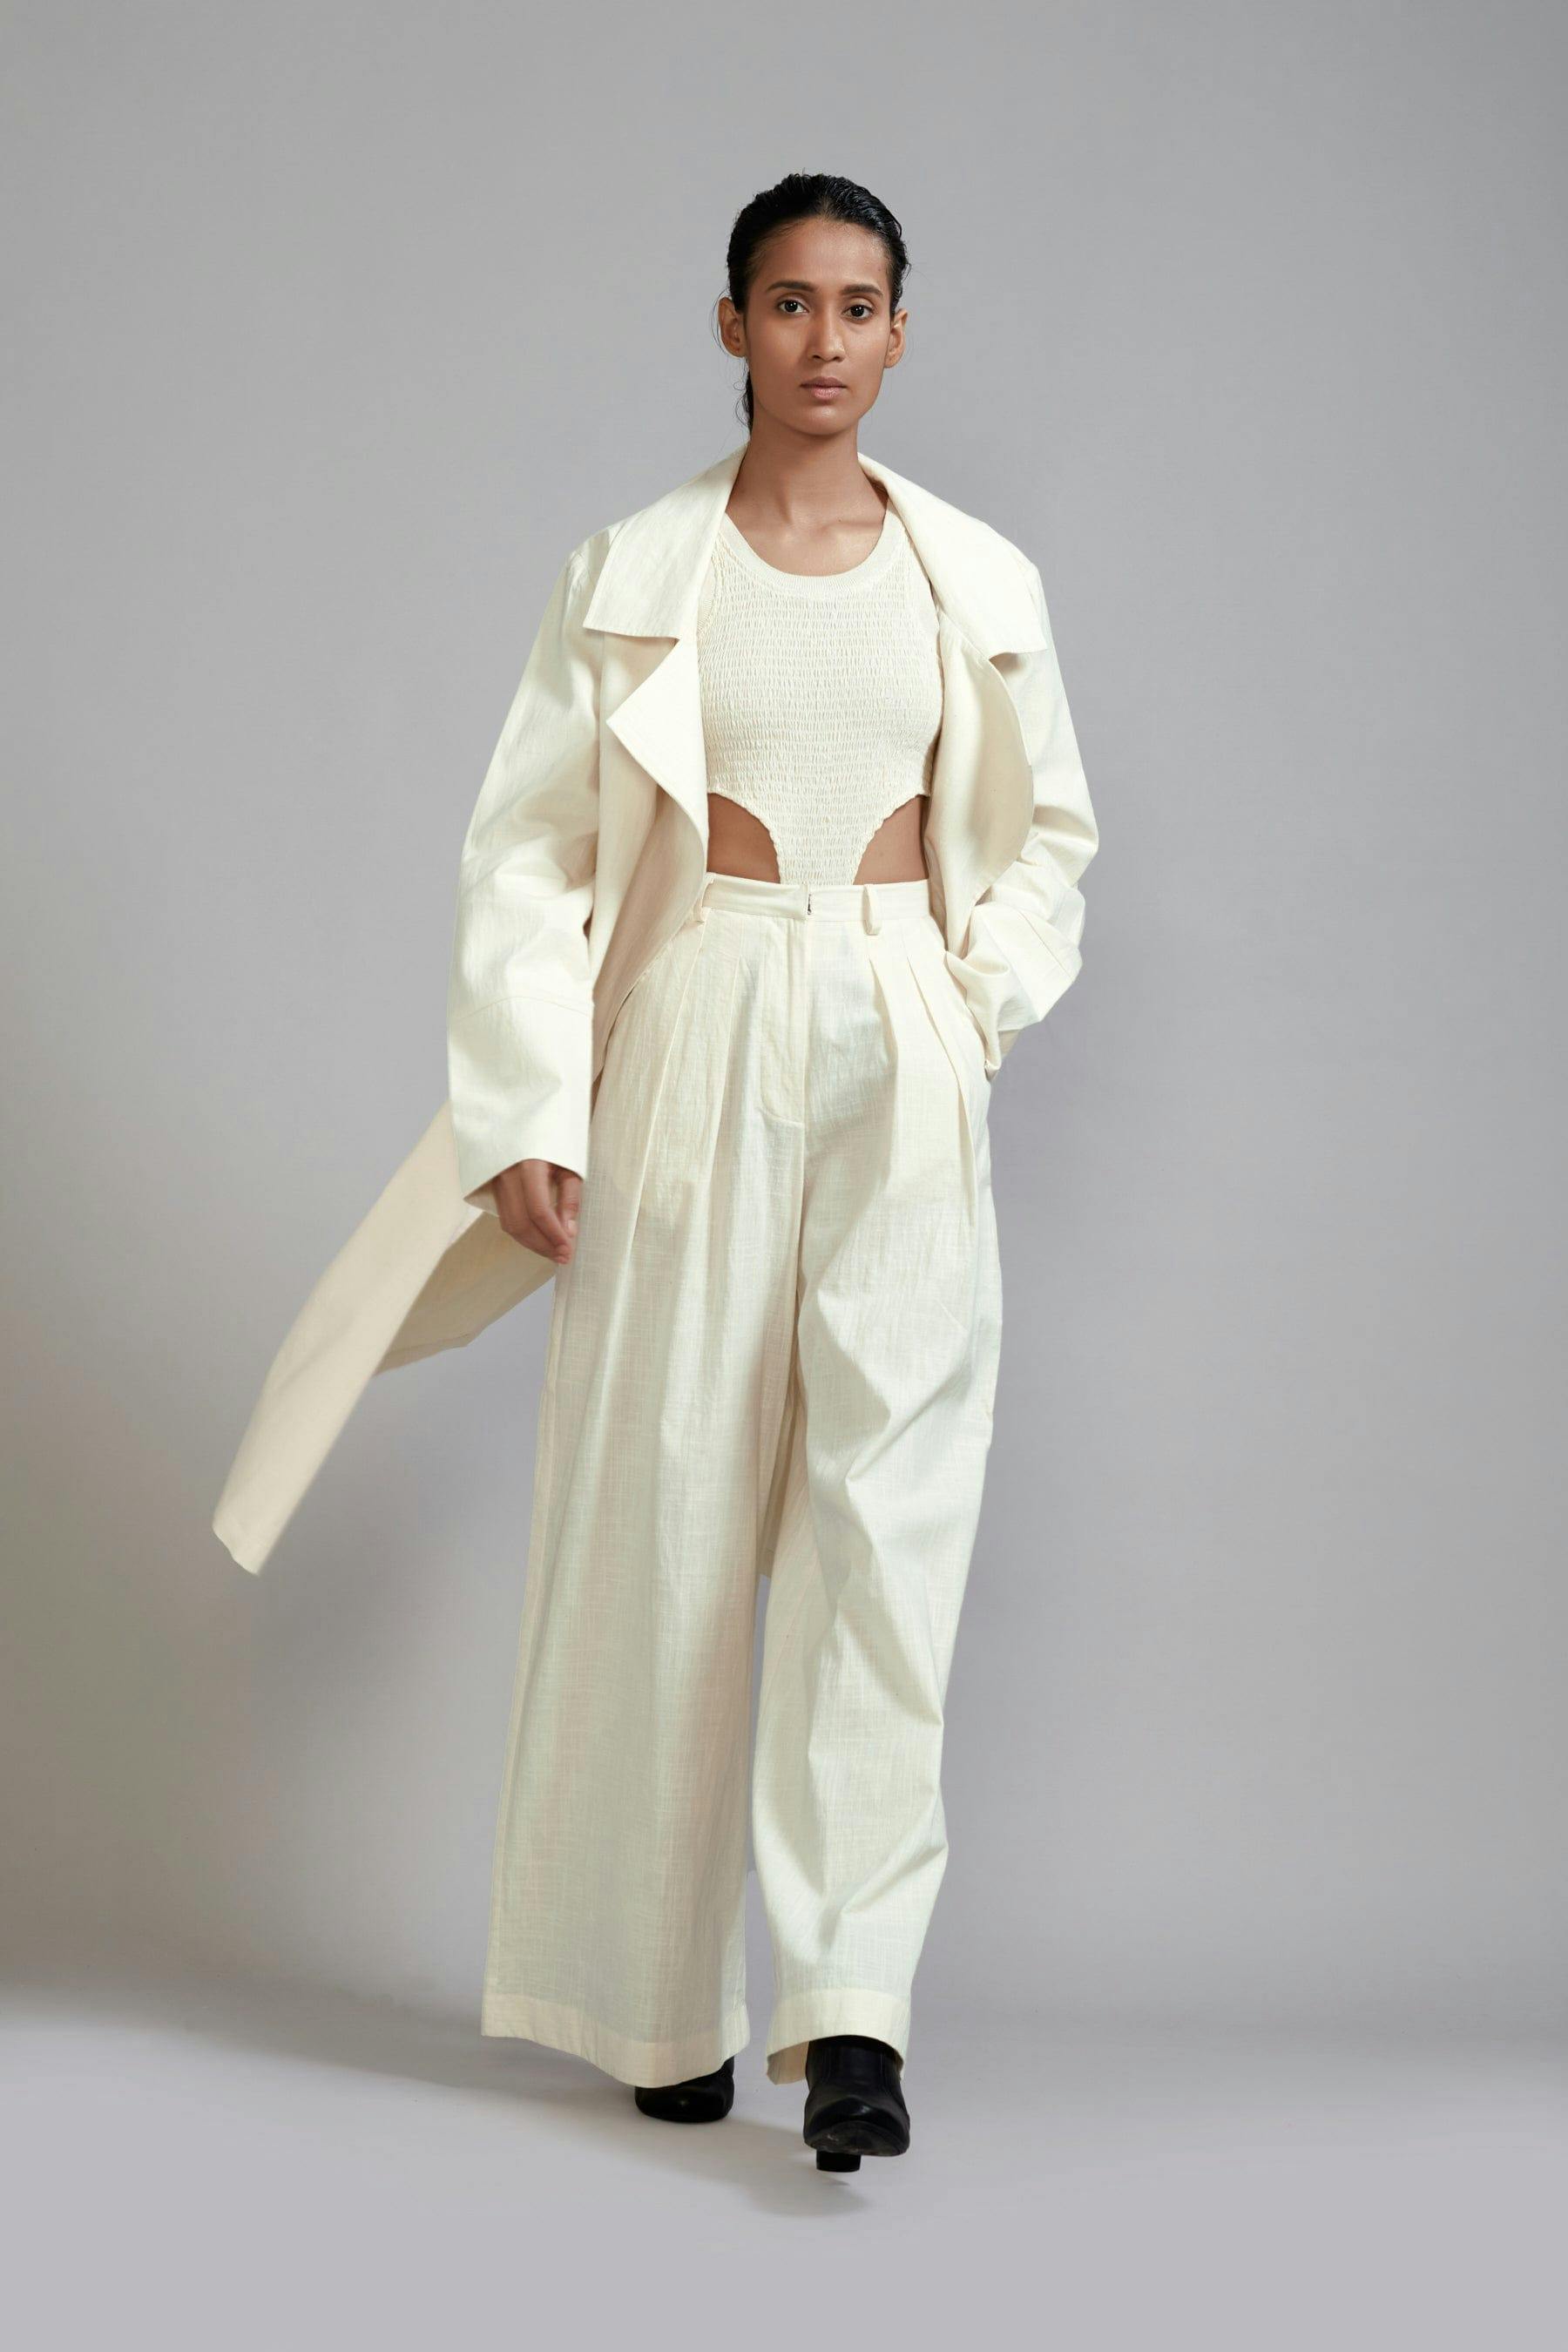 Off-White Trench Jacket Set (3 PCS), a product by Style Mati